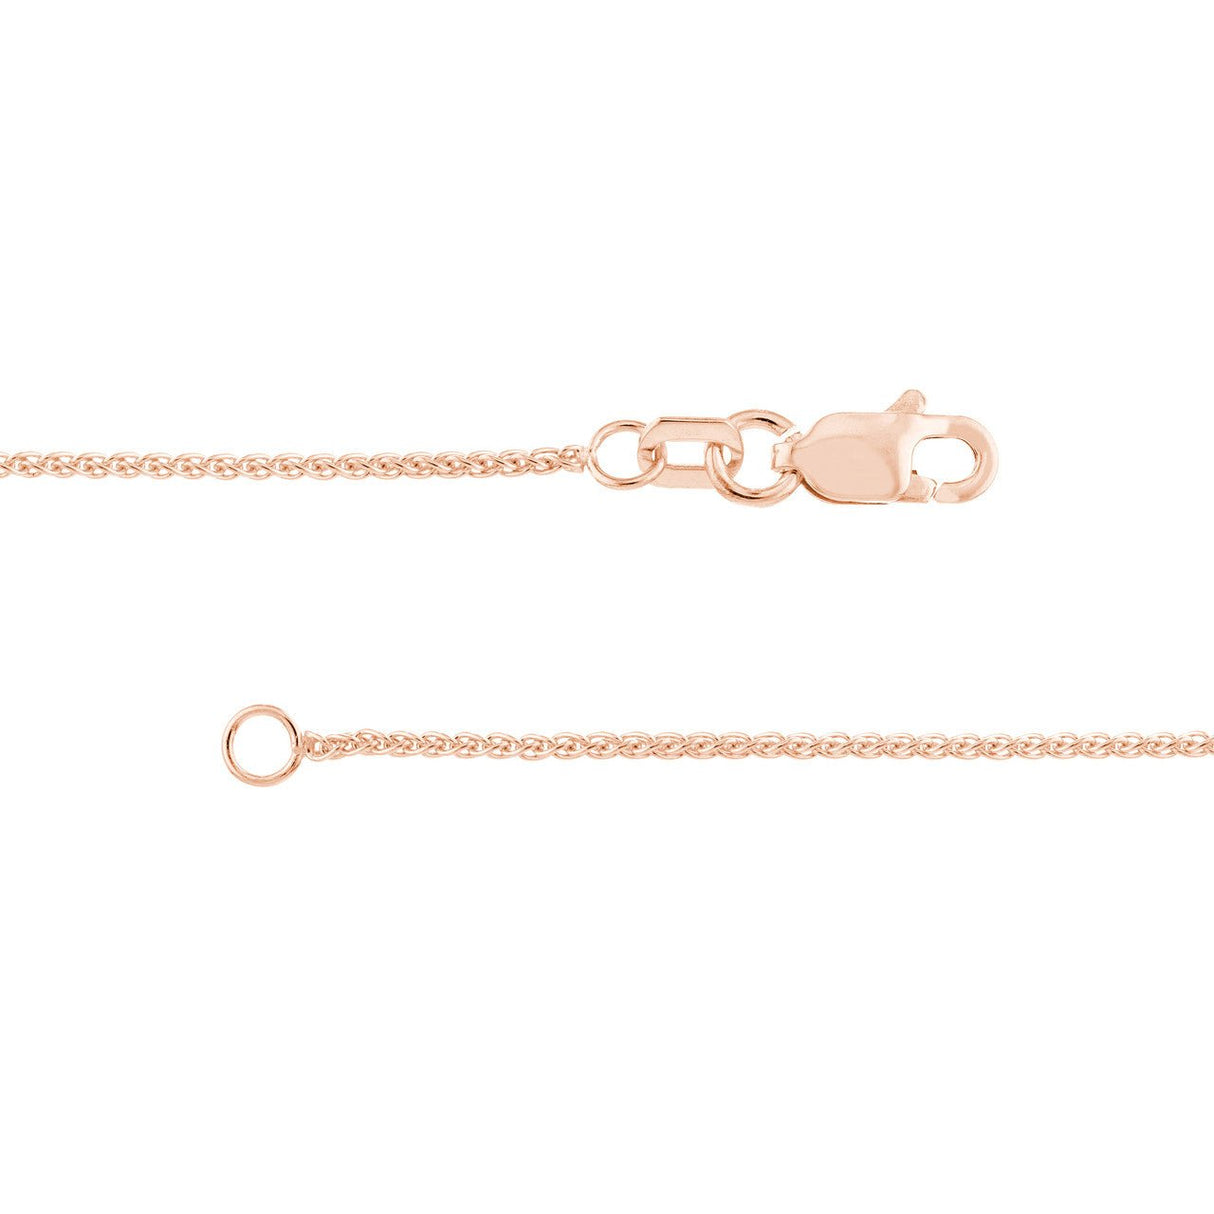 14K Gold Chain, 20", 1.05mm Wheat Chain with Lobster Lock, Gold Layered Chains, Gold Chain Necklace, - Diamond Origin